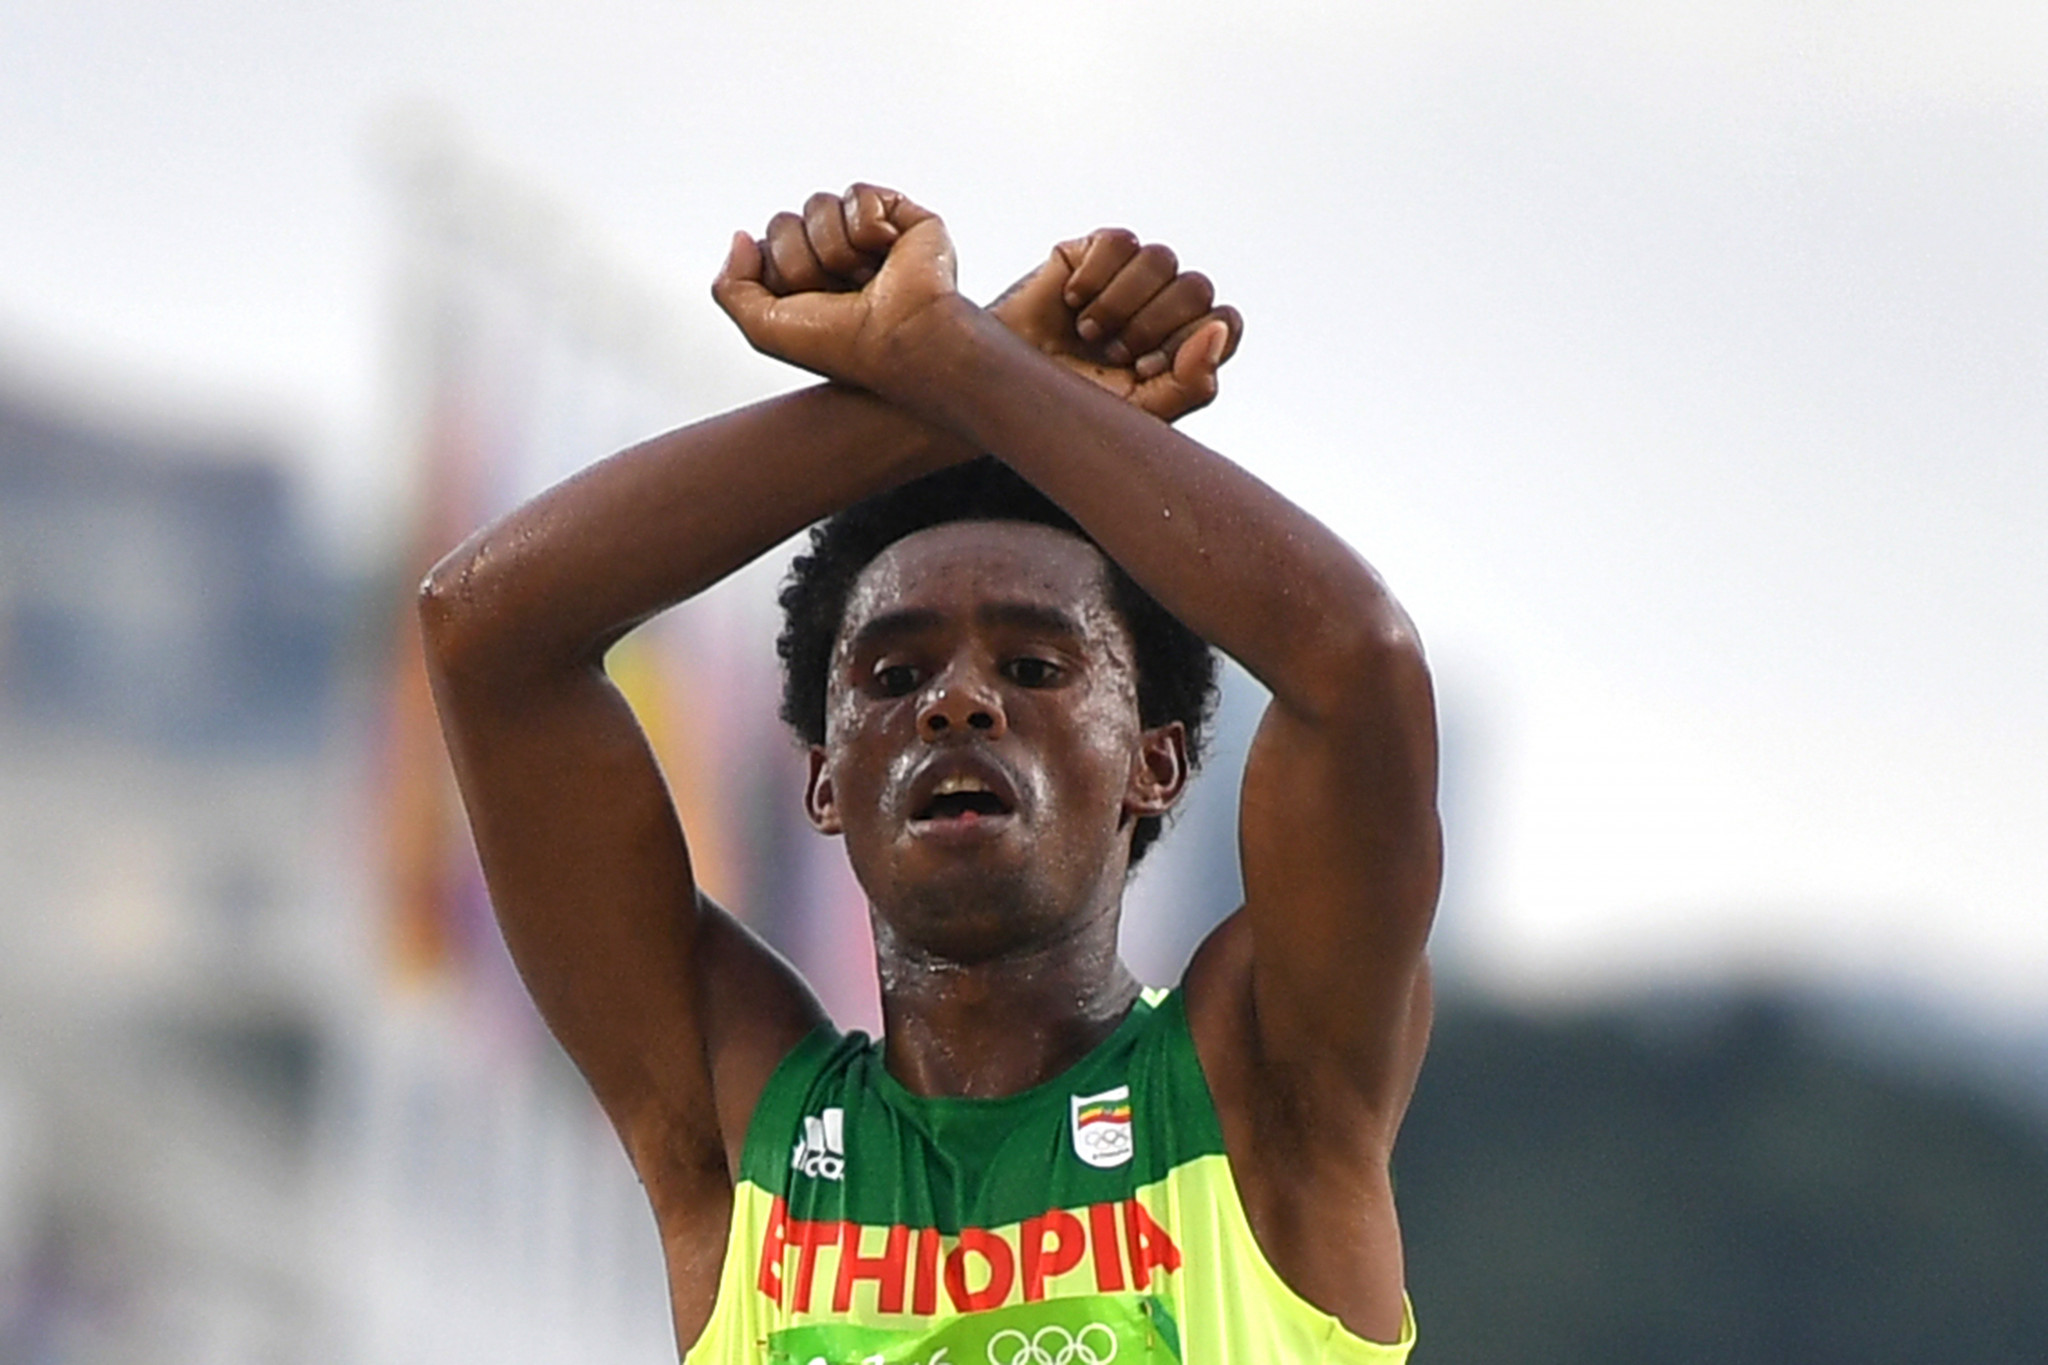 Ethiopian Olympic medallist Feyisa Lilesa went unpunished by the IOC for a political gesture at Rio 2016 ©Getty Images